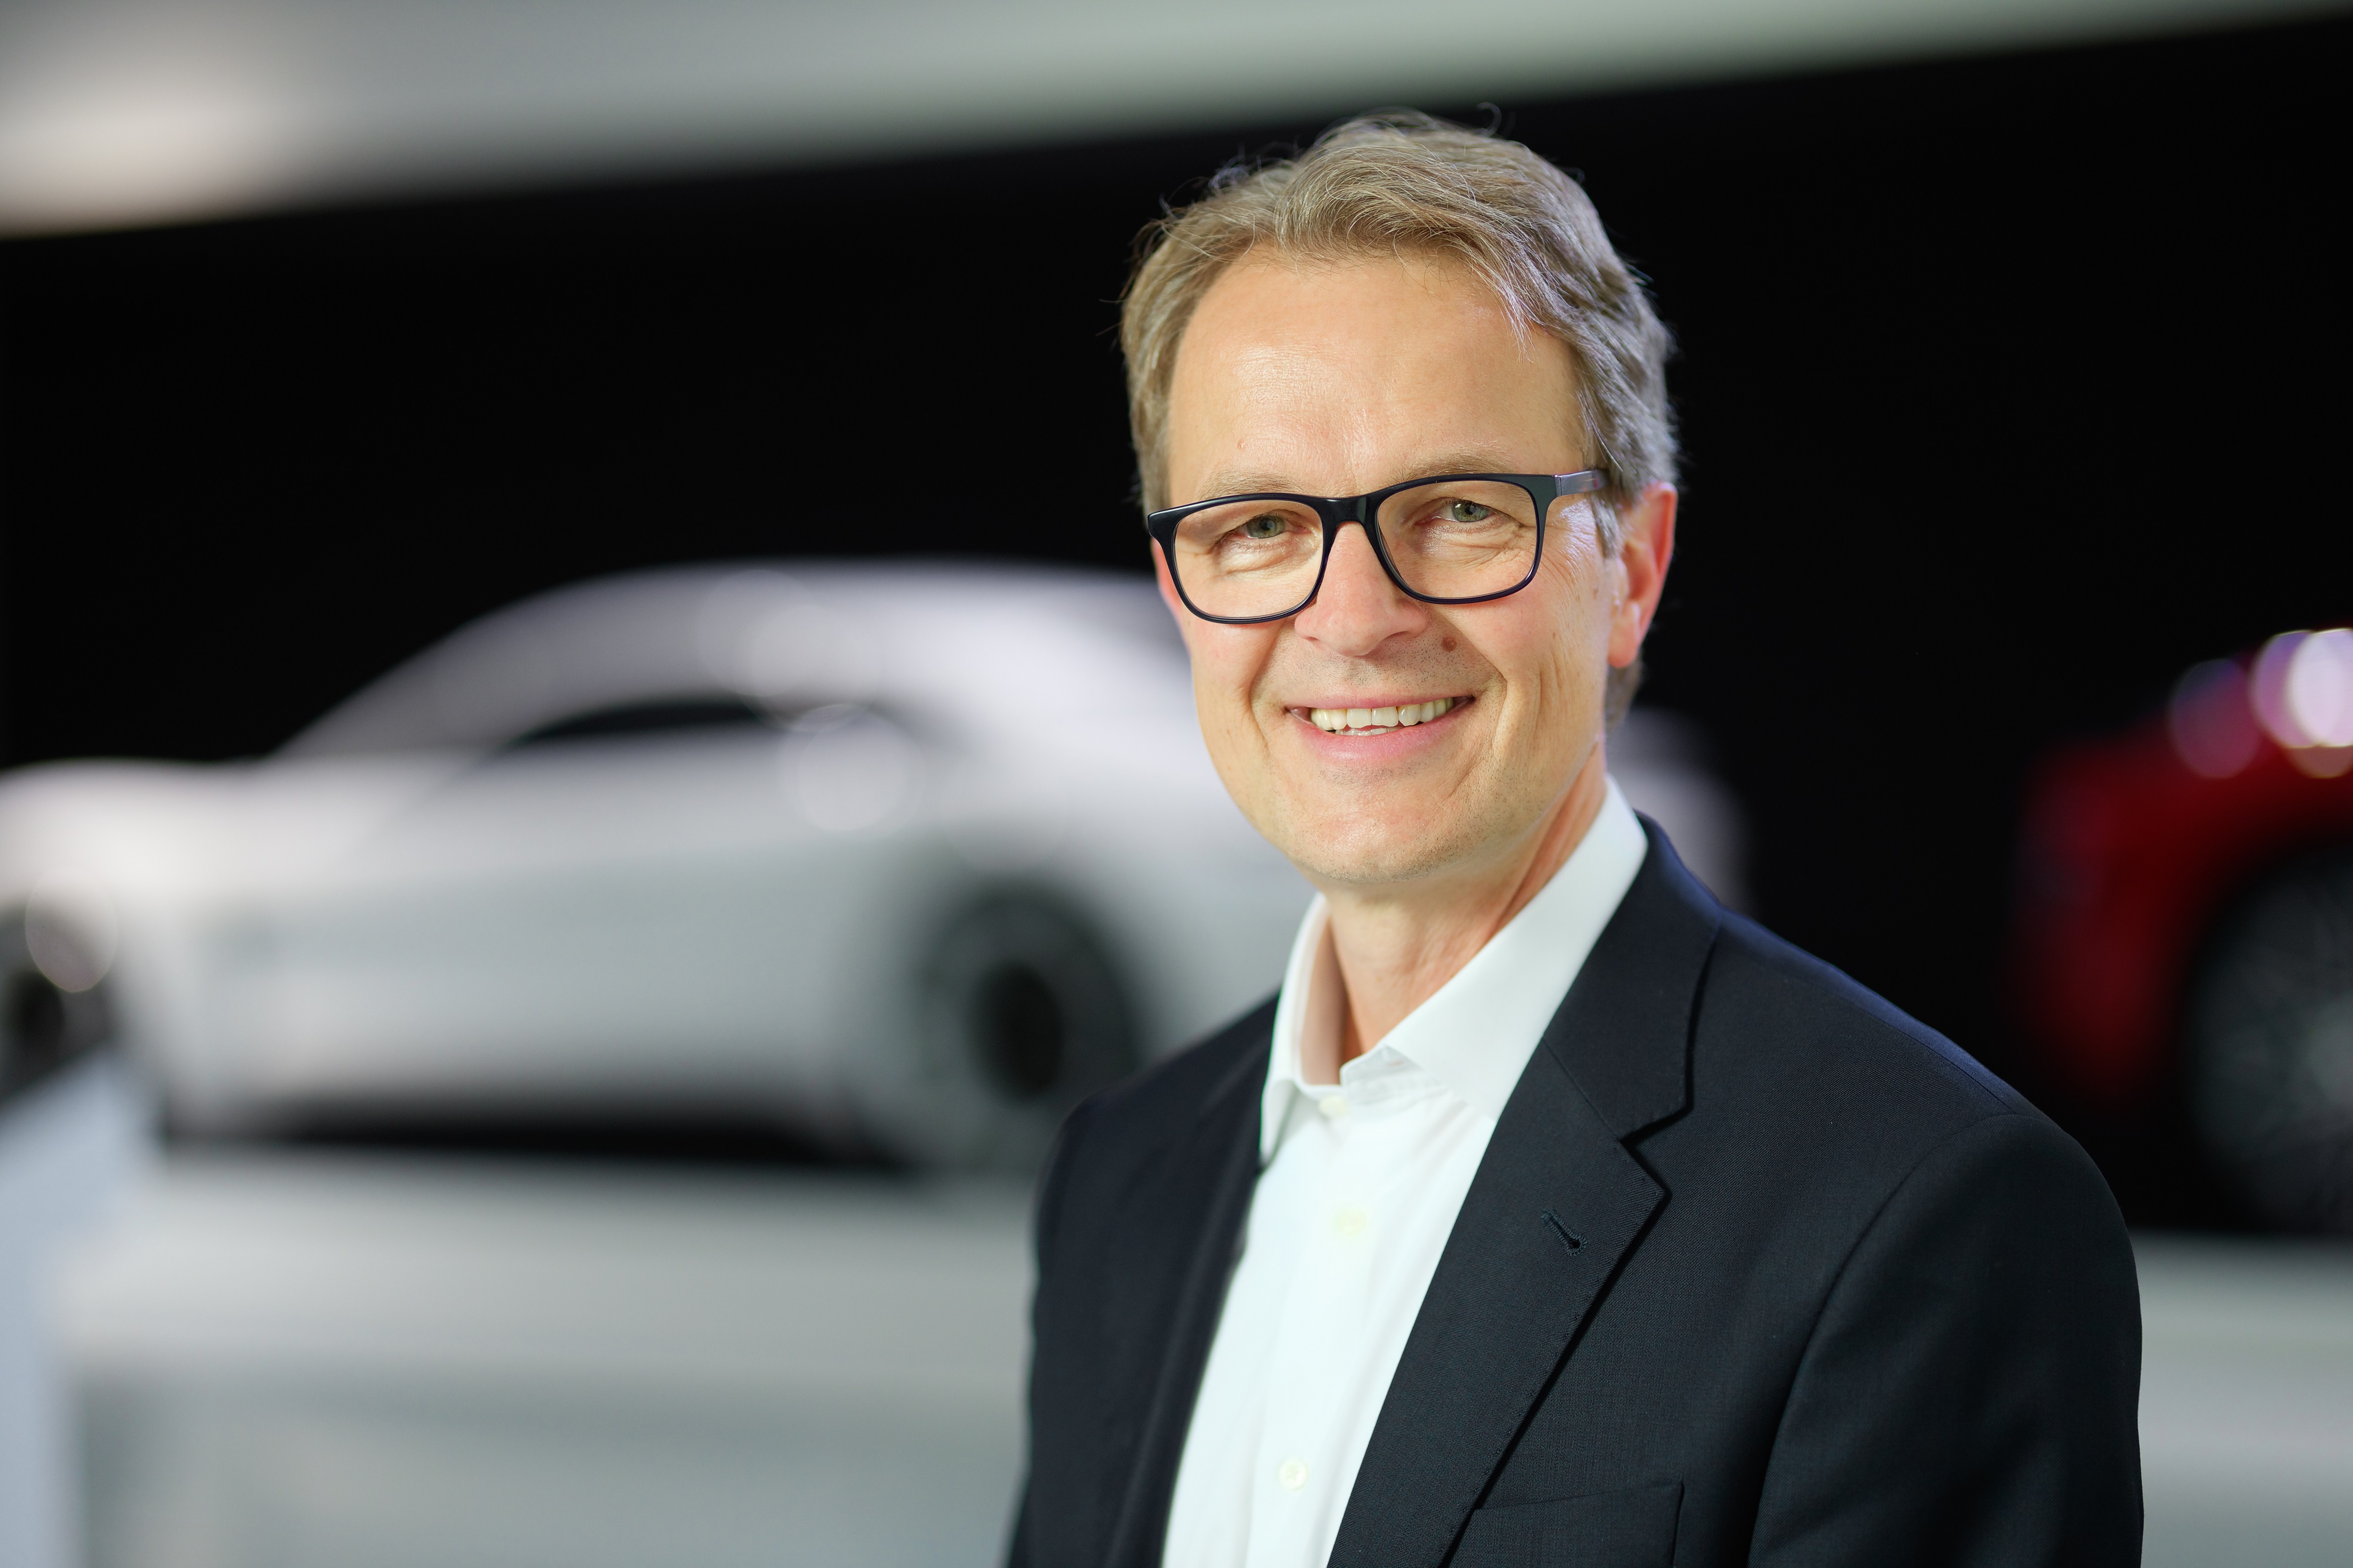 Dr. Kjell Gruner, President and Chief Executive Officer of Porsche Cars North America, 2020